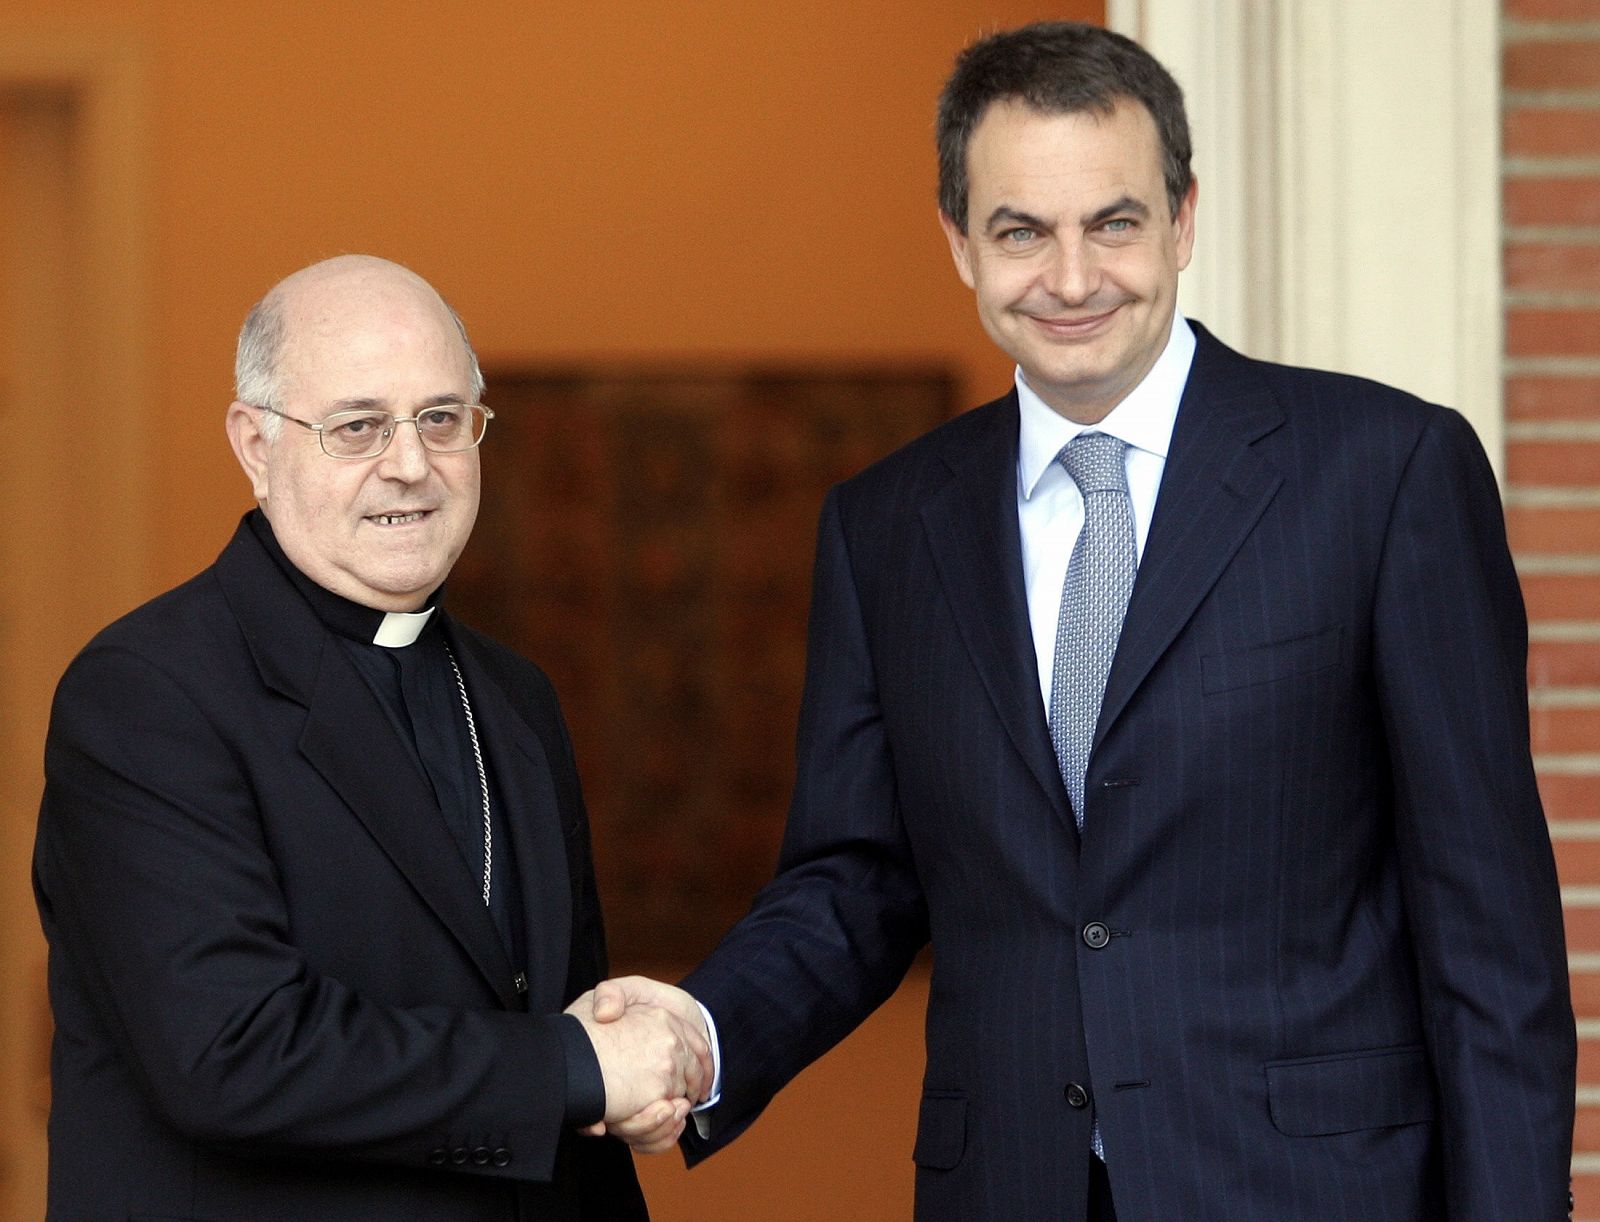 Bishop Blazquez is greeted by Spain's PM Zapatero before their meeting in Madrid.